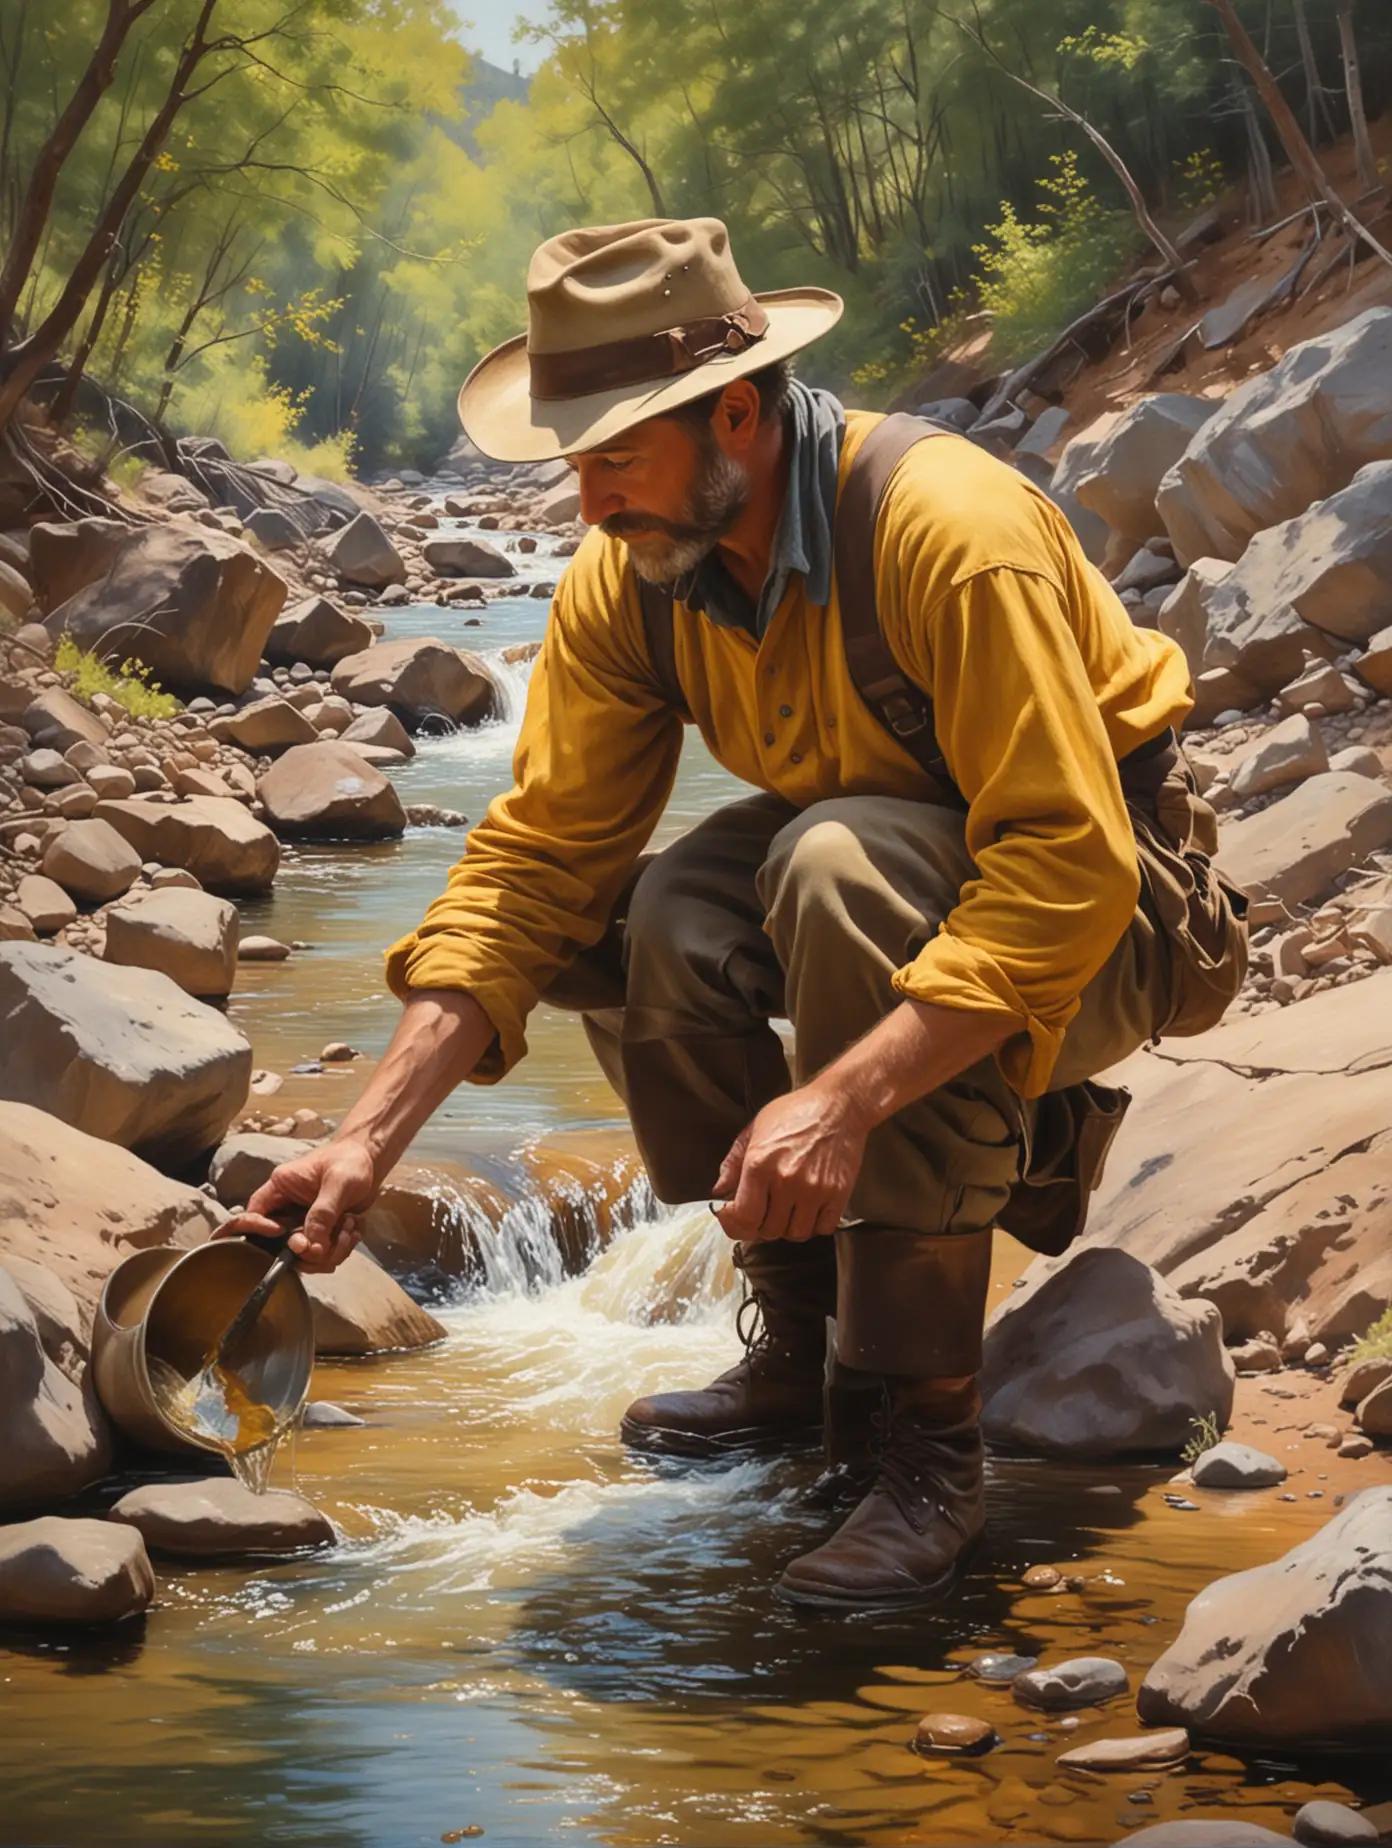 Degas style  oil painting of a gold miner panning for gold in a mountain creek